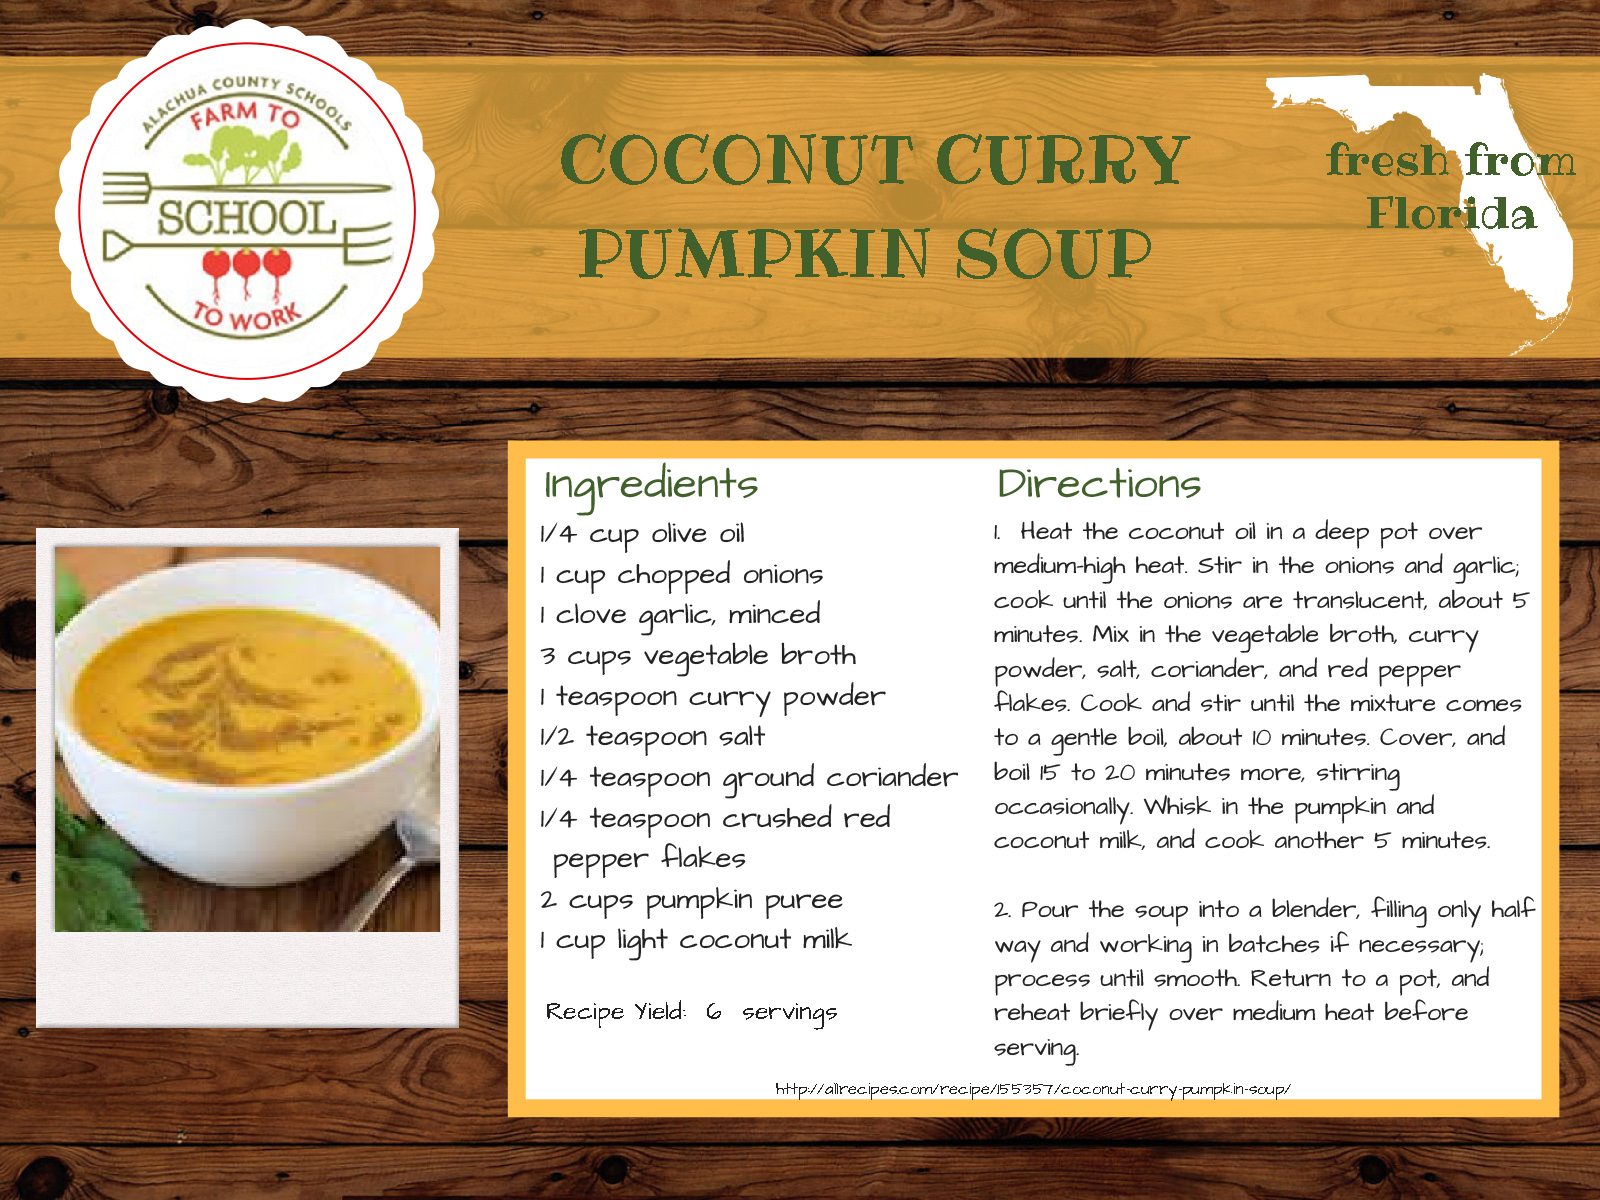 Coconut Curry Pumpkin Soup Recipe, Ingredients: 1/4 cup olive oil, 1 cup chopped onions, 1 clove garlic (minced), 3 cups vegetable broth, 1 teaspoon curry powder, 1/2 teaspoon salt, 1/4 teaspoon ground coriander, 1/4 teaspoon crushed red pepper flakes, 2 cups pumpkin puree, 1 cup light coconut milk 1. Heat the coconut oil in a deep pot over medium-high heat. Stir in the onions and garlic. Cook until the onions are translucent, about 5 minutes. Mix in the vegetable broth, curry powder, salt, coriander, and red pepper flakes. Cook and stir until the mixture come to a gentle boil, about 10 minutes. Cover, and boil 15 to 20 minutes more, stirring occasionally. Whisk in the pumpkin and coconut milk, and cook another 5 minutes. 2. Pour the soup into a blender, filling only half way and working in batches if necessary. Process until smooth. Return to a pot, and reheat briefly over medium heat before serving. Recipe Yield: 6 servings Recipe from: http://allrecipes.com/recipe/155357/coconut-curry-pumpkin-soup/